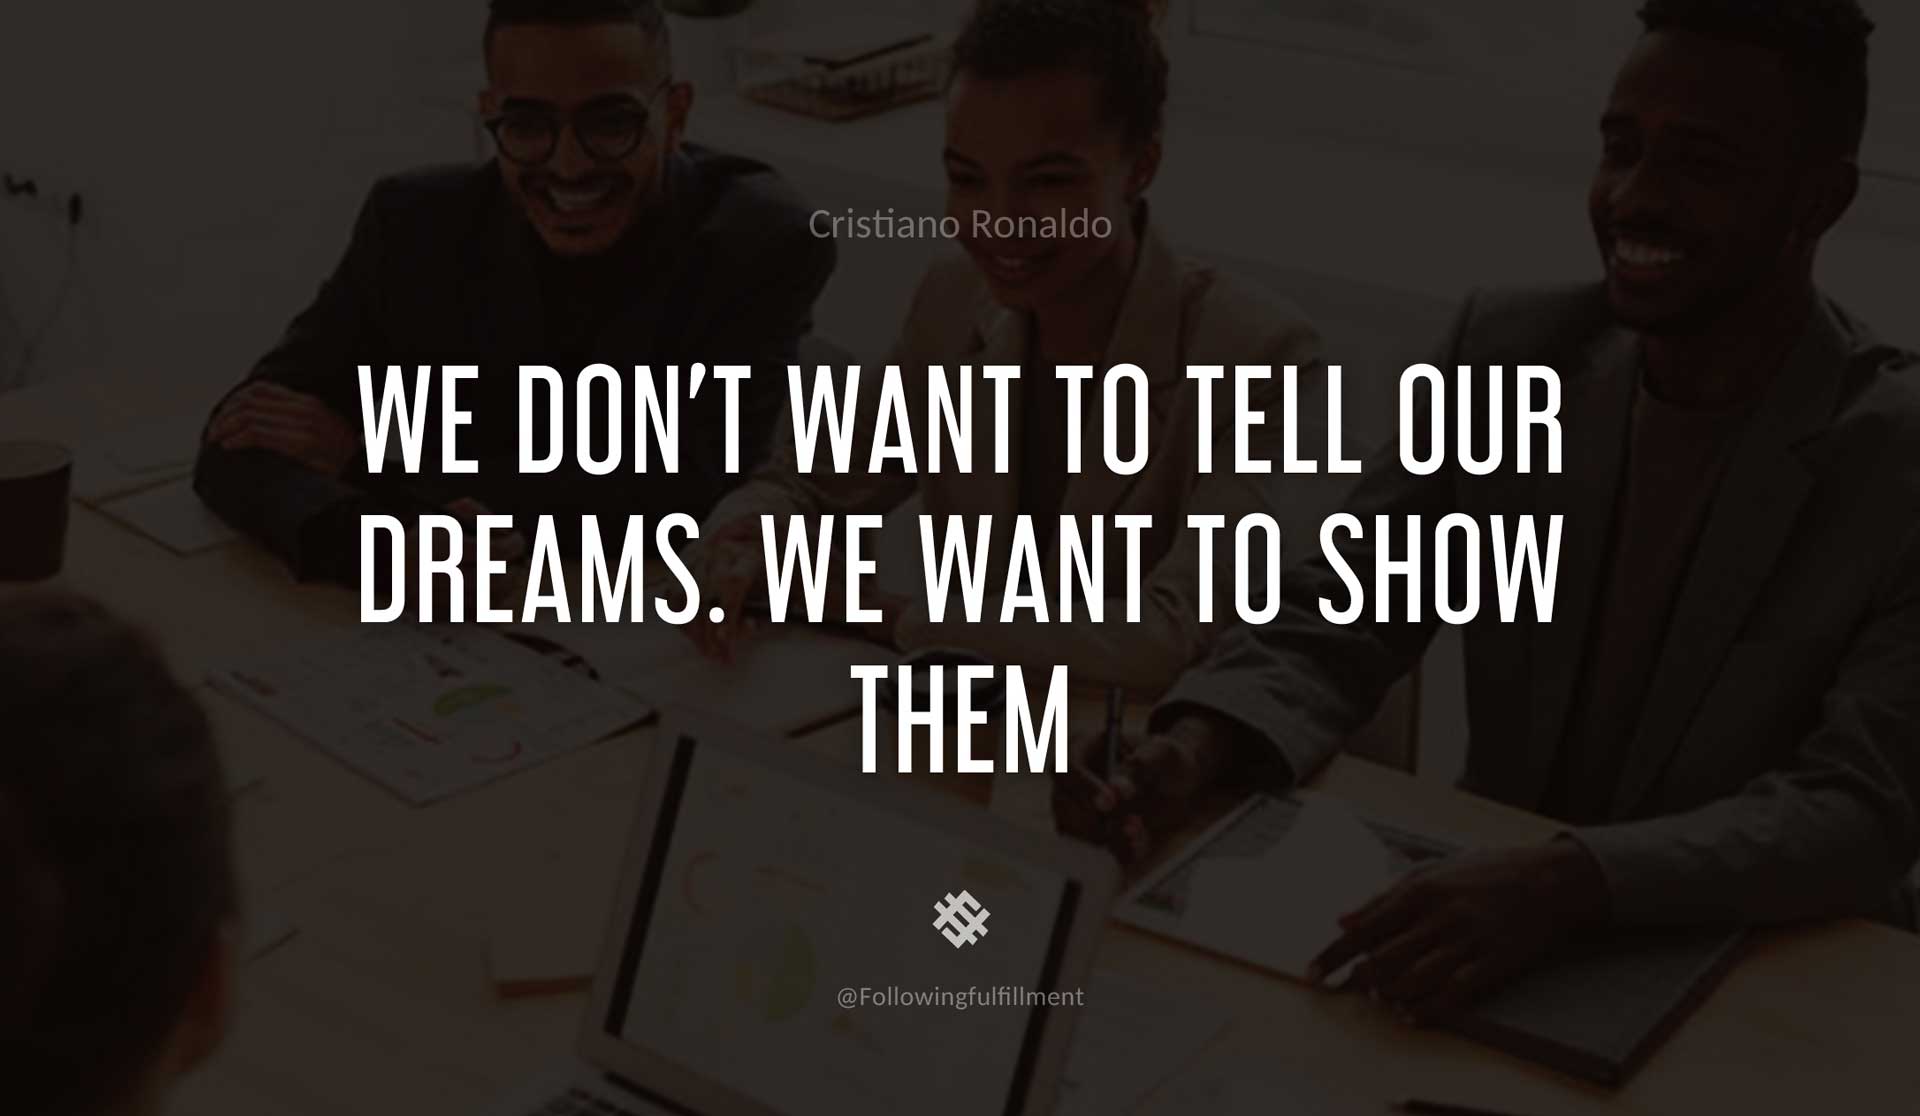 We-don't-want-to-tell-our-dreams.-We-want-to-show-them-CRISTIANO-RONALDO-Quote.jpg